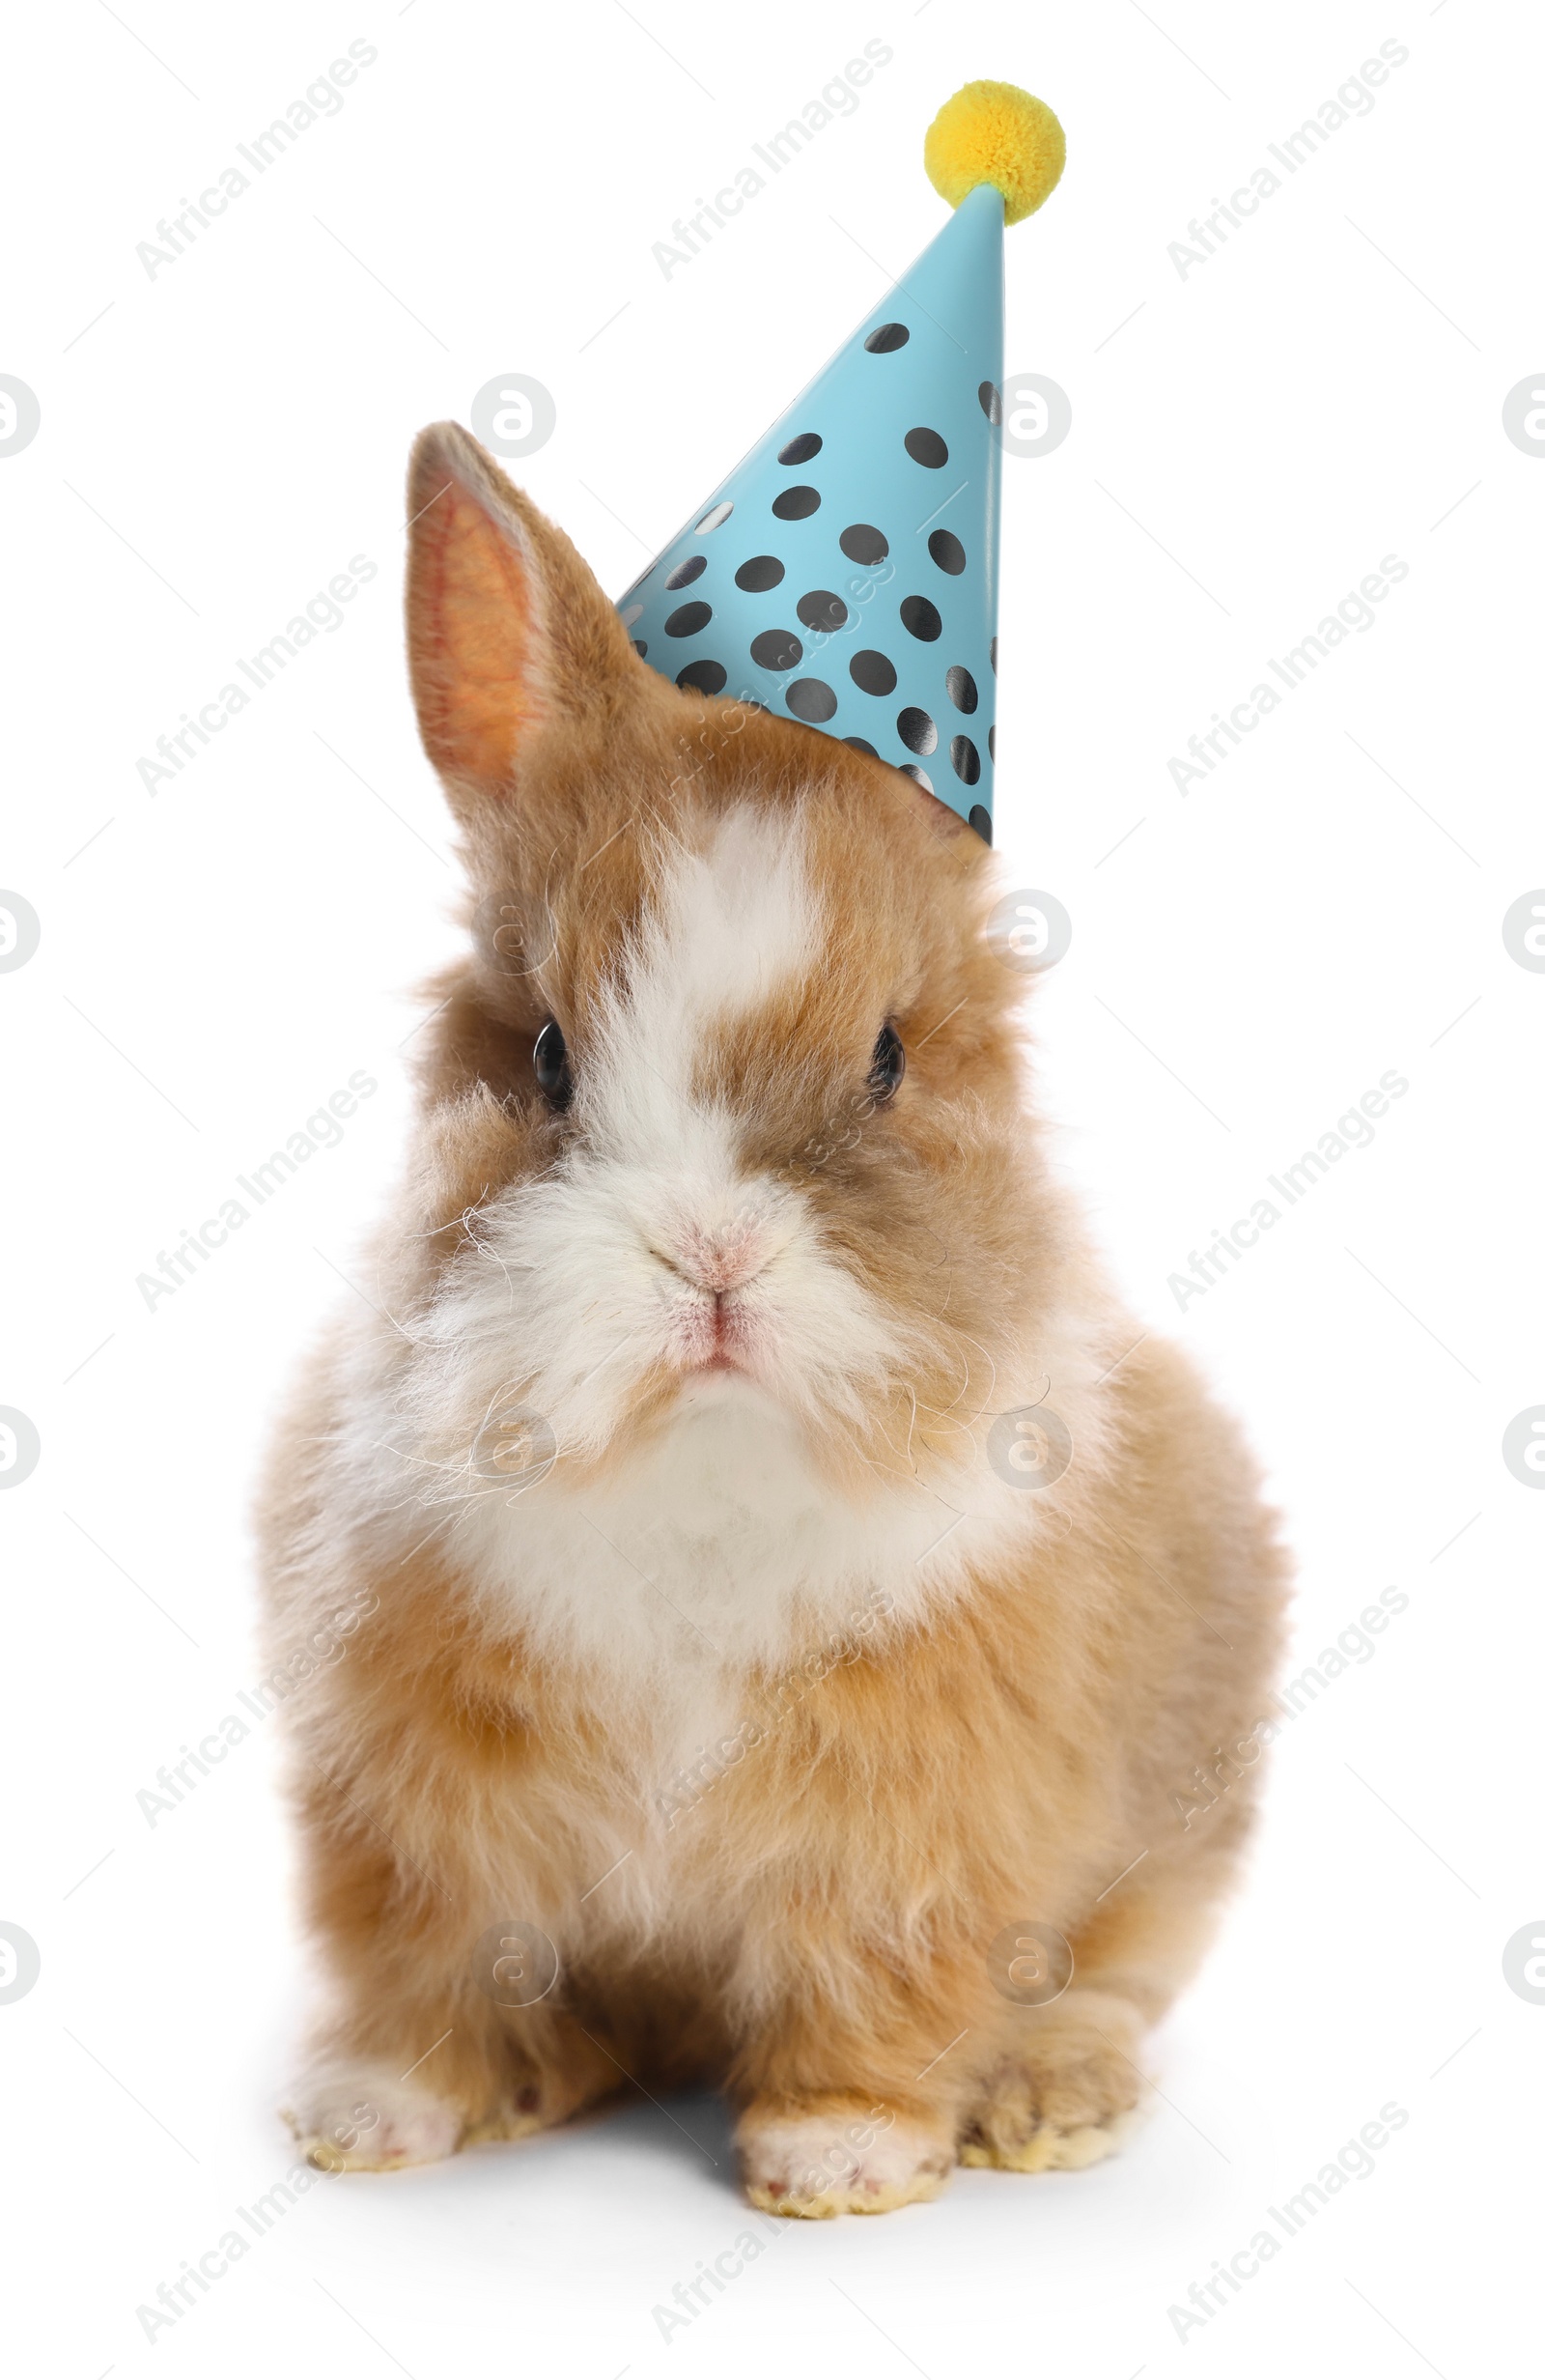 Image of Cute bunny with party hat on white background